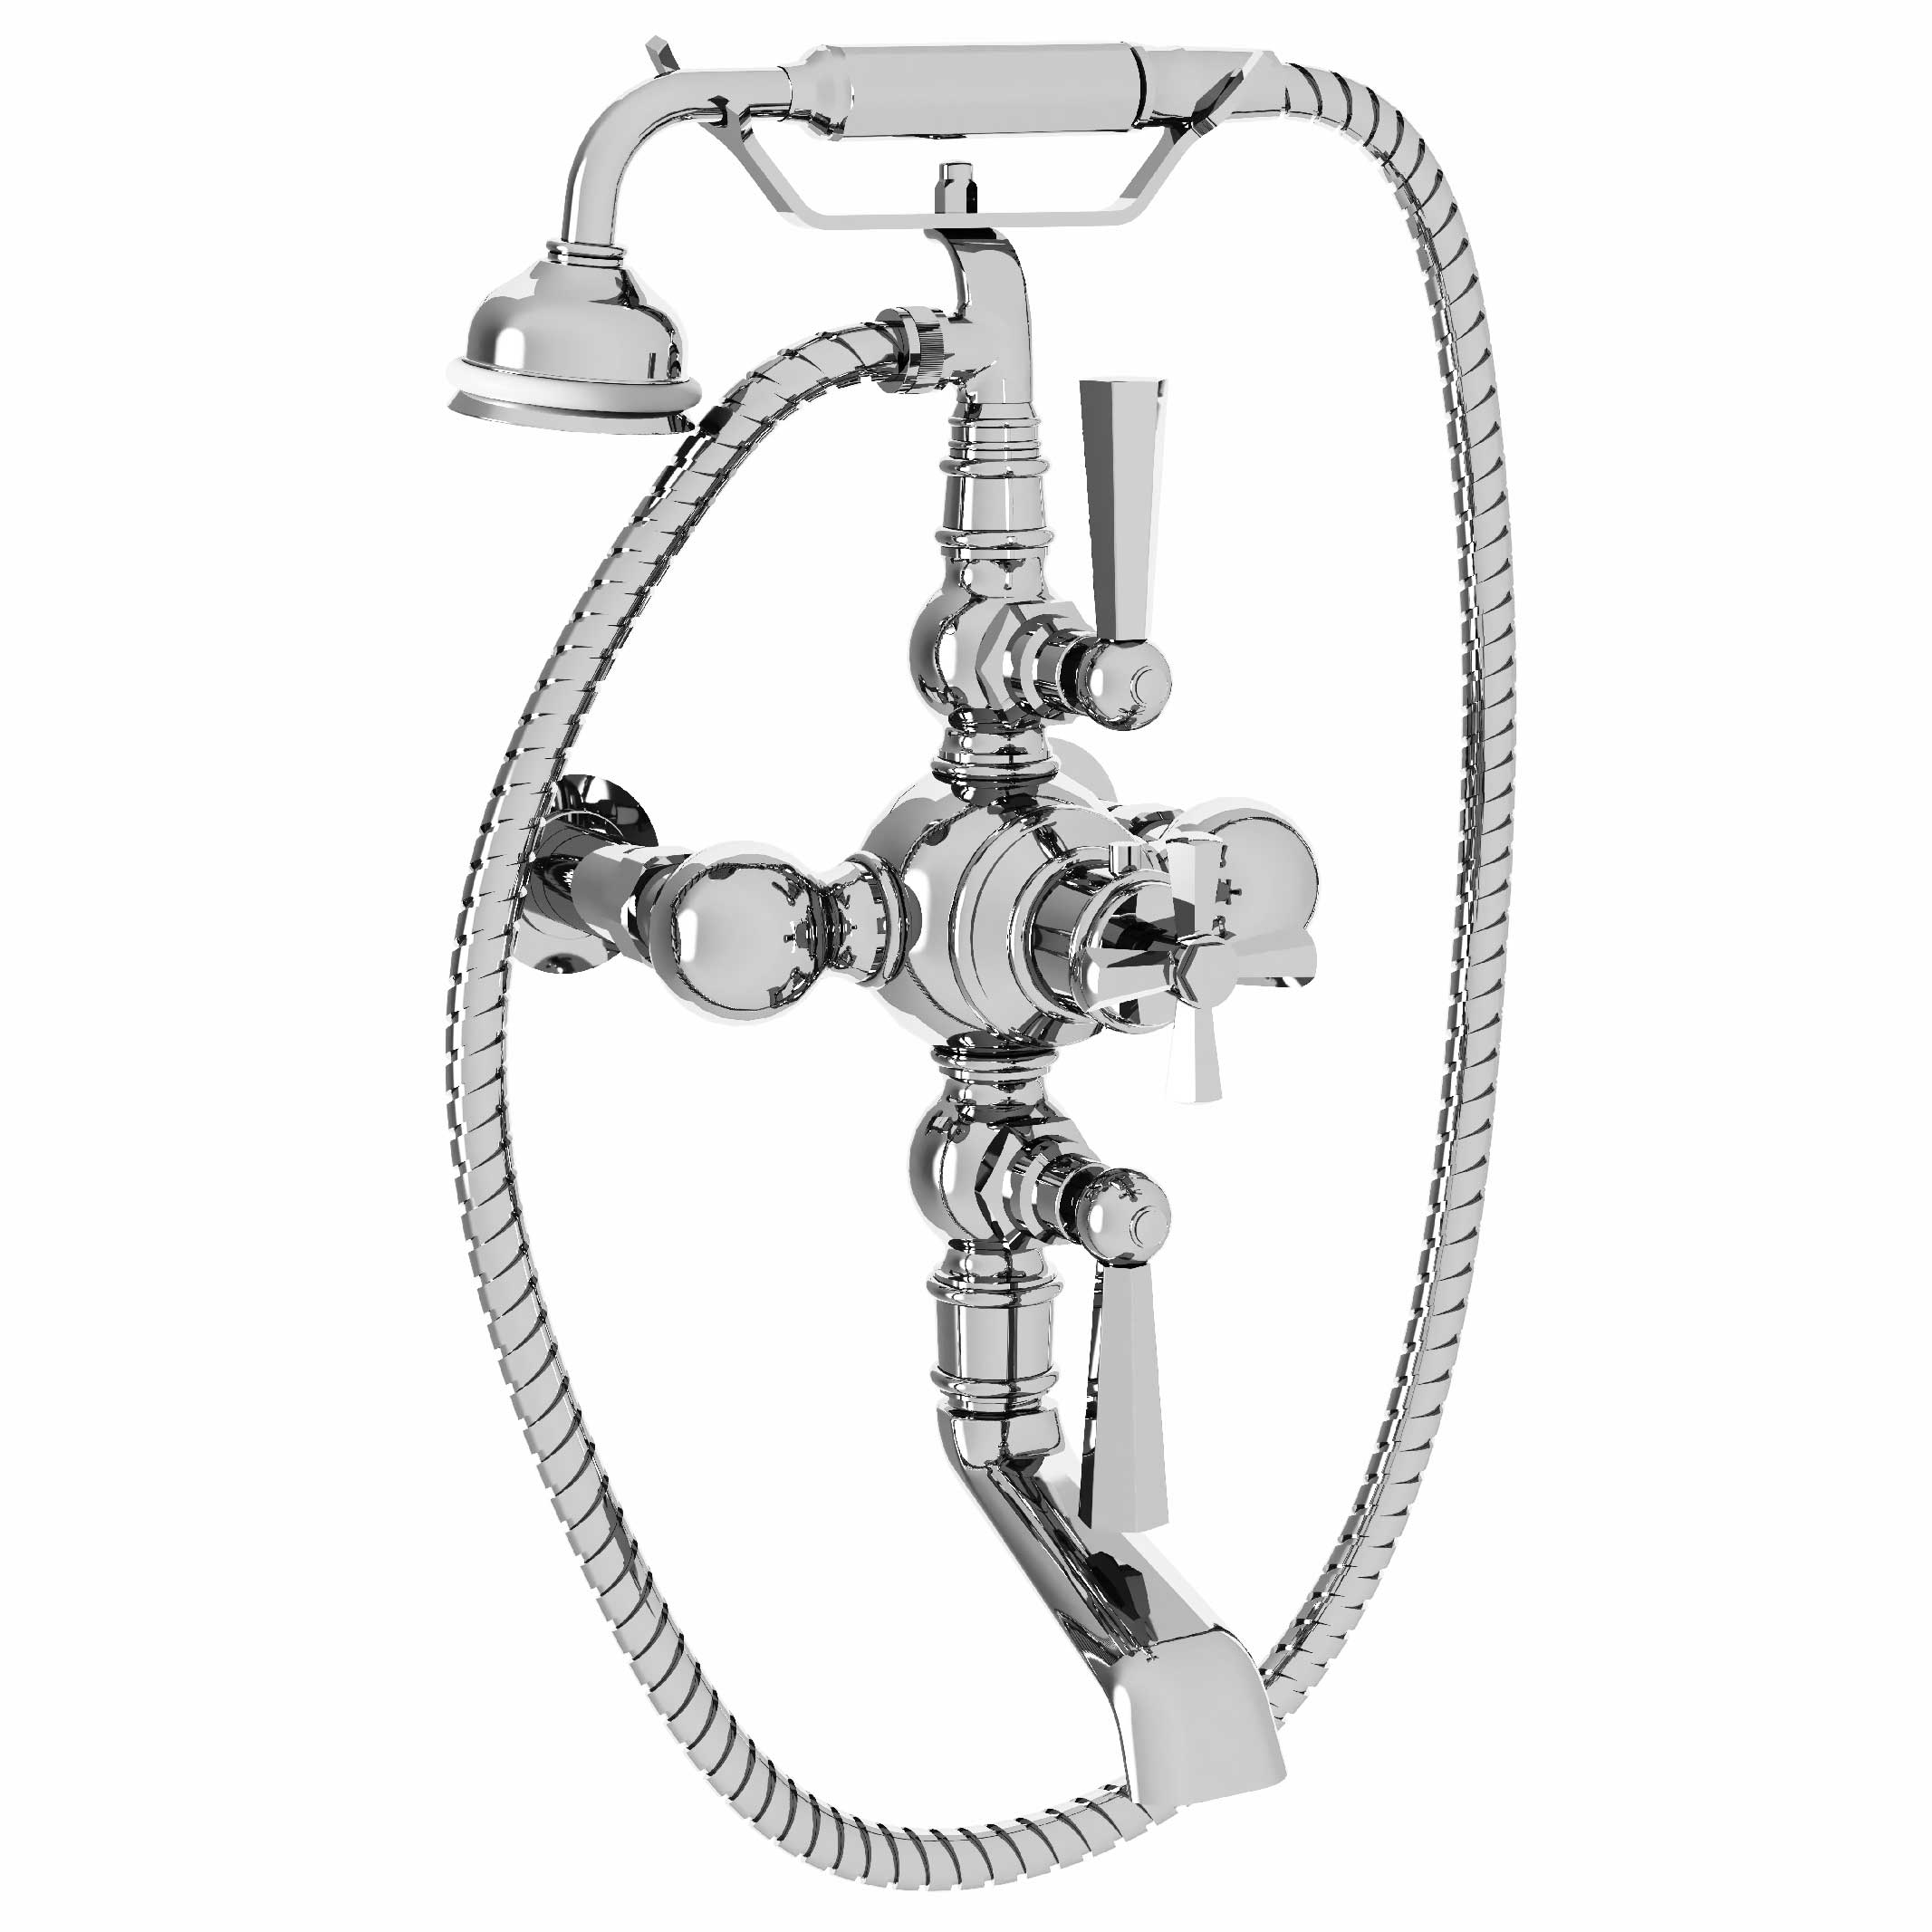 M39-3201T Wall mounted thermo. bath and shower mixer